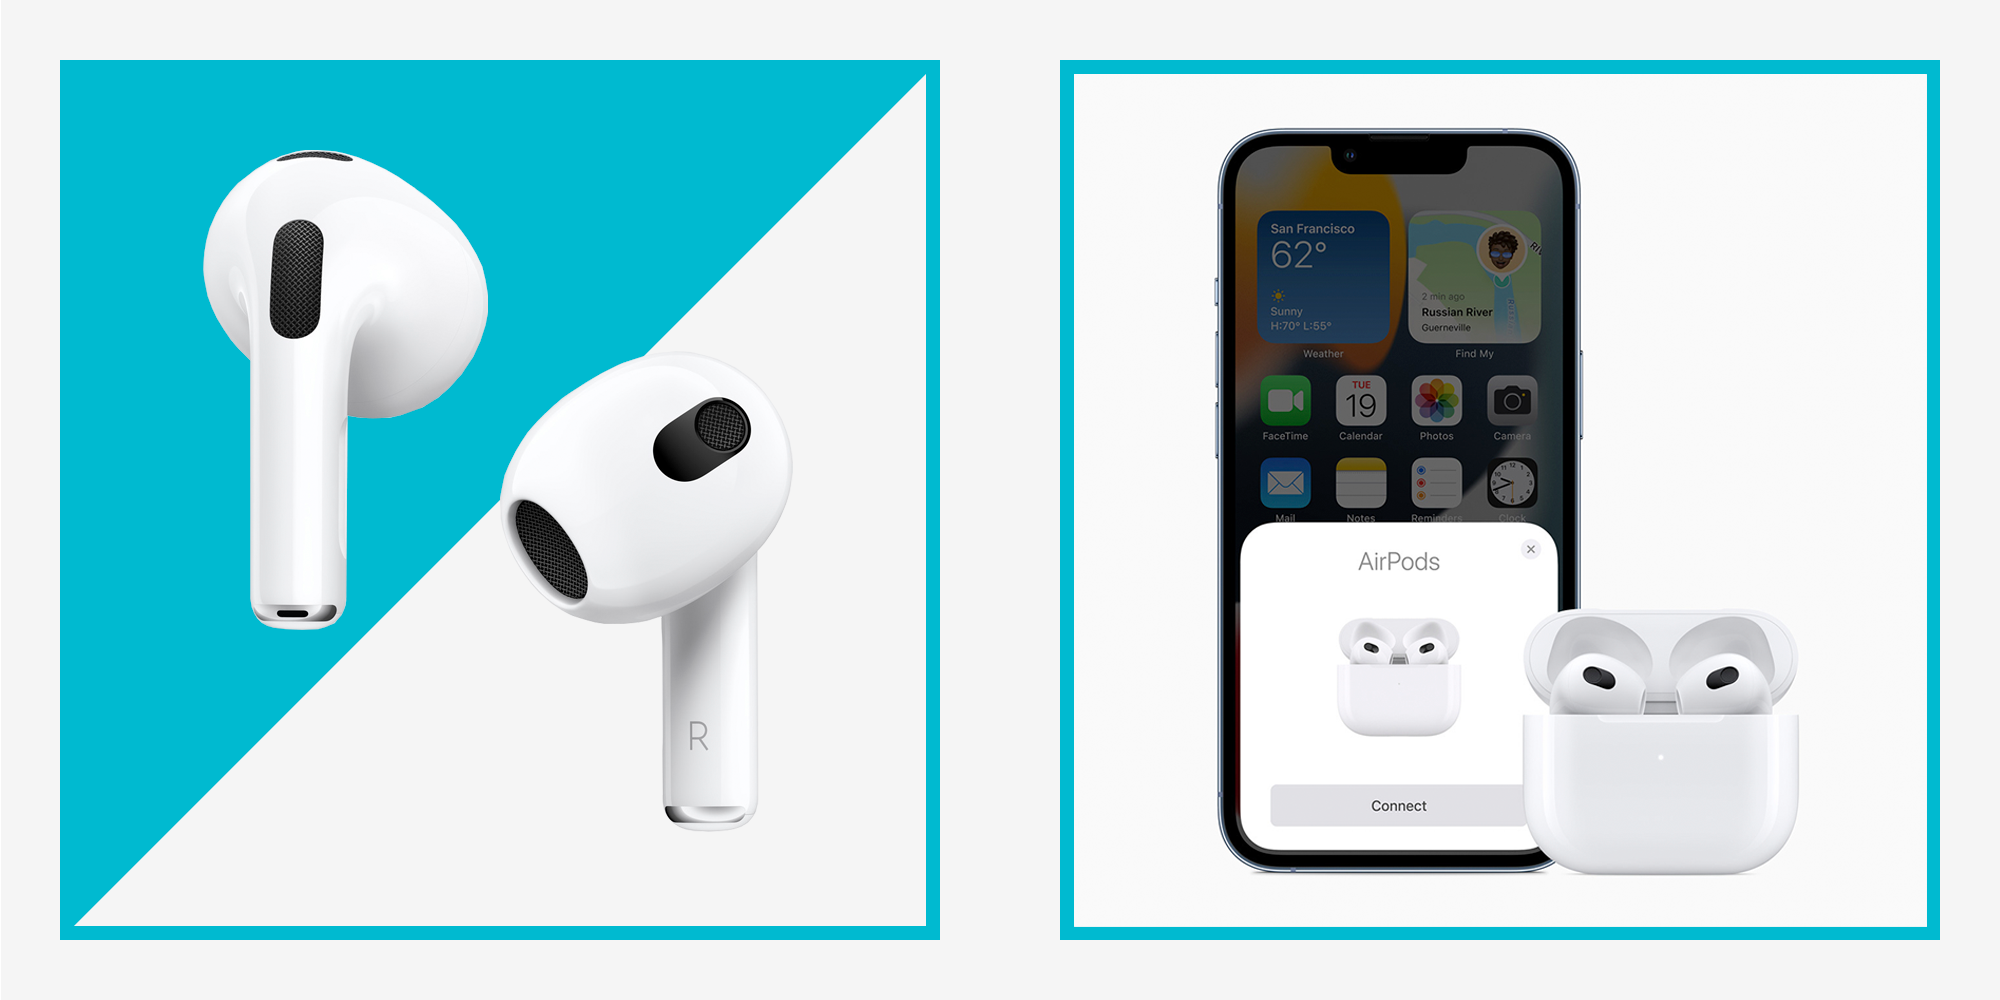 Apple AirPods Third Generation Review - $179 Heaphones